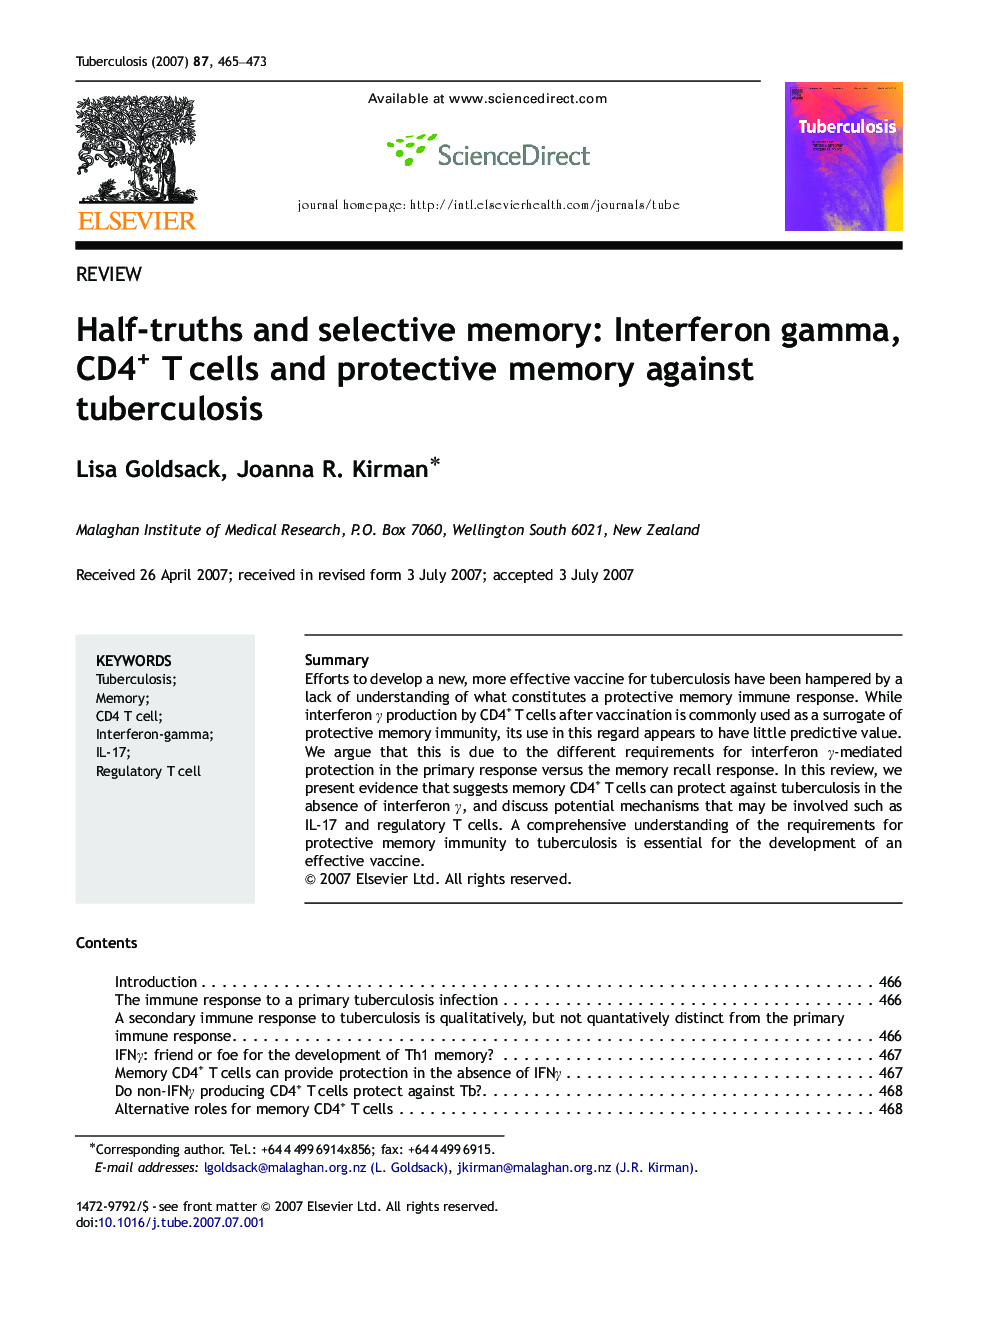 Half-truths and selective memory: Interferon gamma, CD4+ T cells and protective memory against tuberculosis